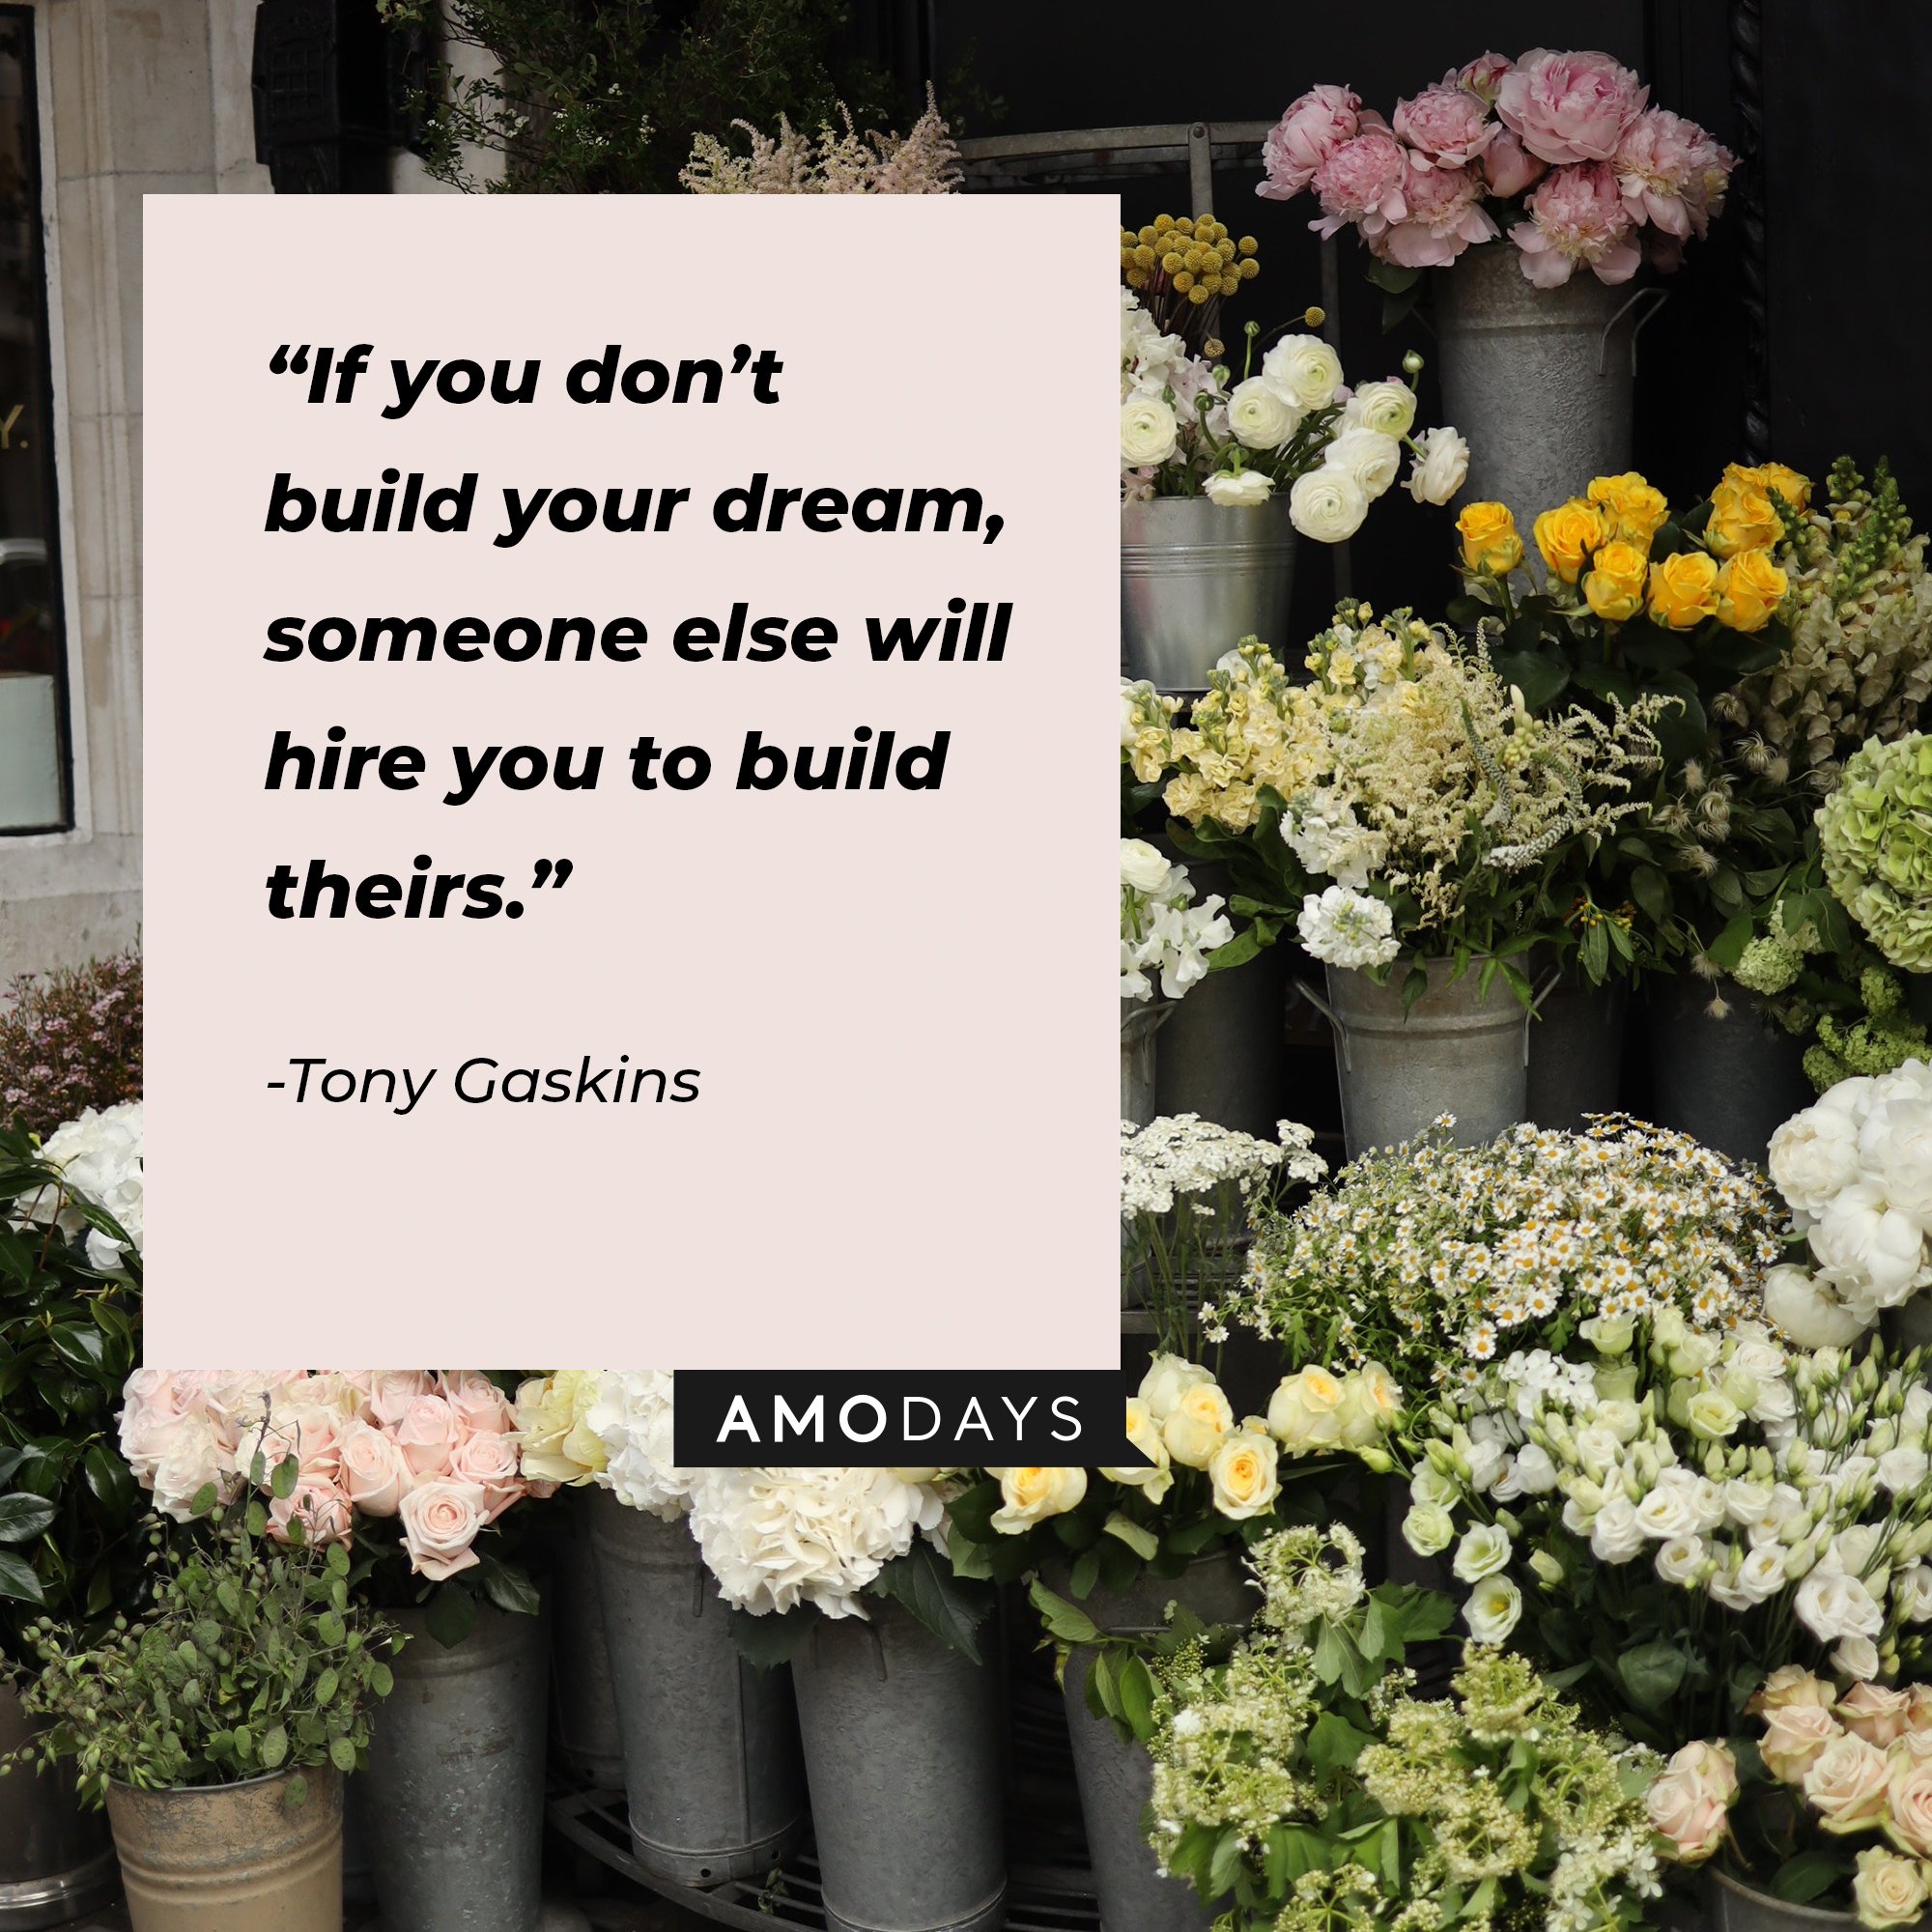 Tony Gaskins's quote: “If you don’t build your dream, someone else will hire you to build theirs.”  | Image: AmoDays